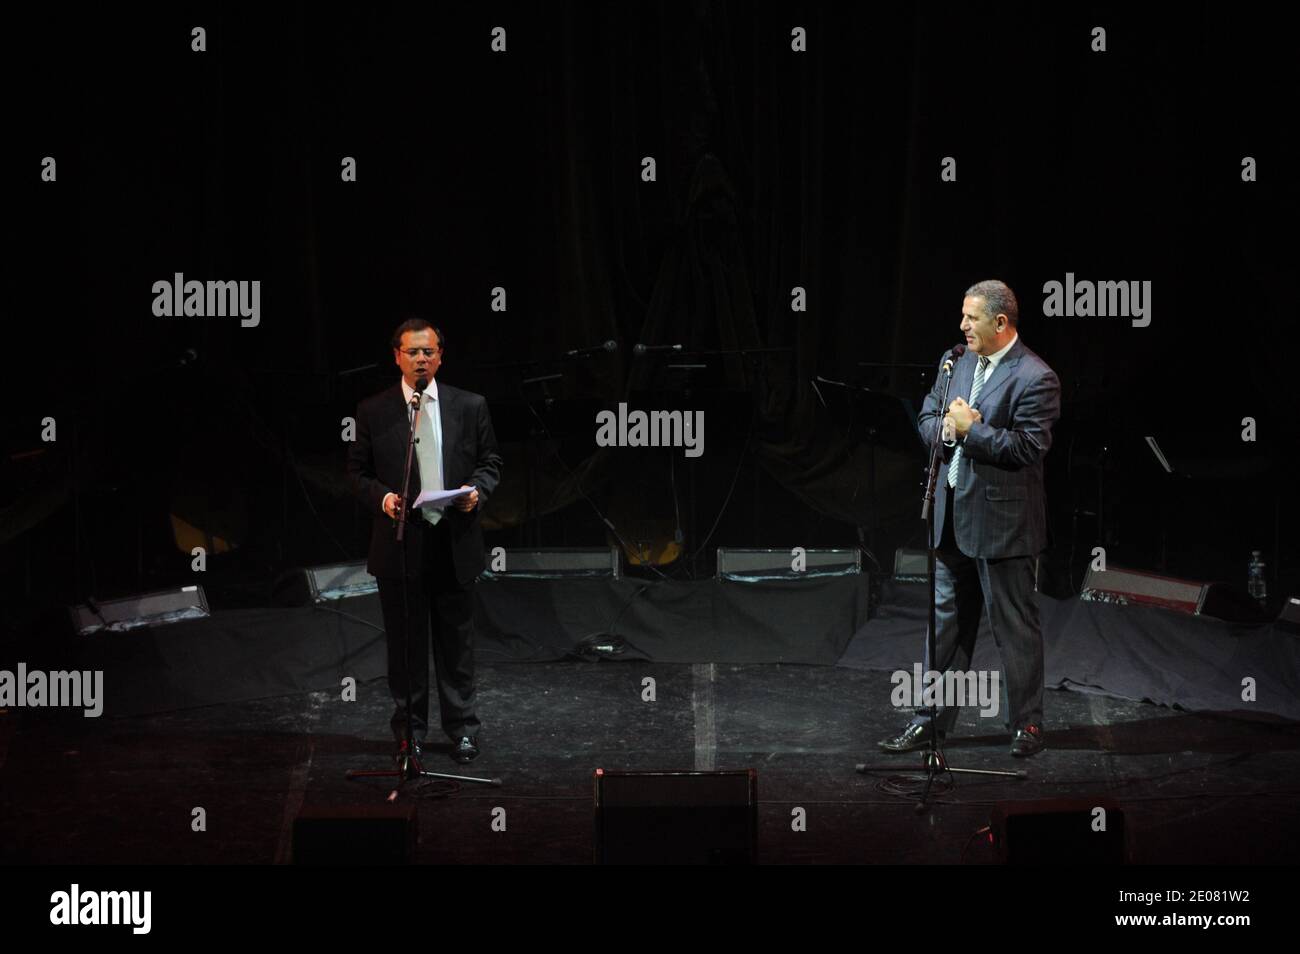 A rabbi and an imam sing during 'El Gusto' chaabi music concert at the 'Grand Rex' theatre on January 9 and 10, 2012. 'El Gusto' used to be an orchestra playing in Algeria in the 1950s, and got reunited recently after a documentary movie on them. Photo by Ammar Abd Rabbo/ABACAPRESS.COM Stock Photo